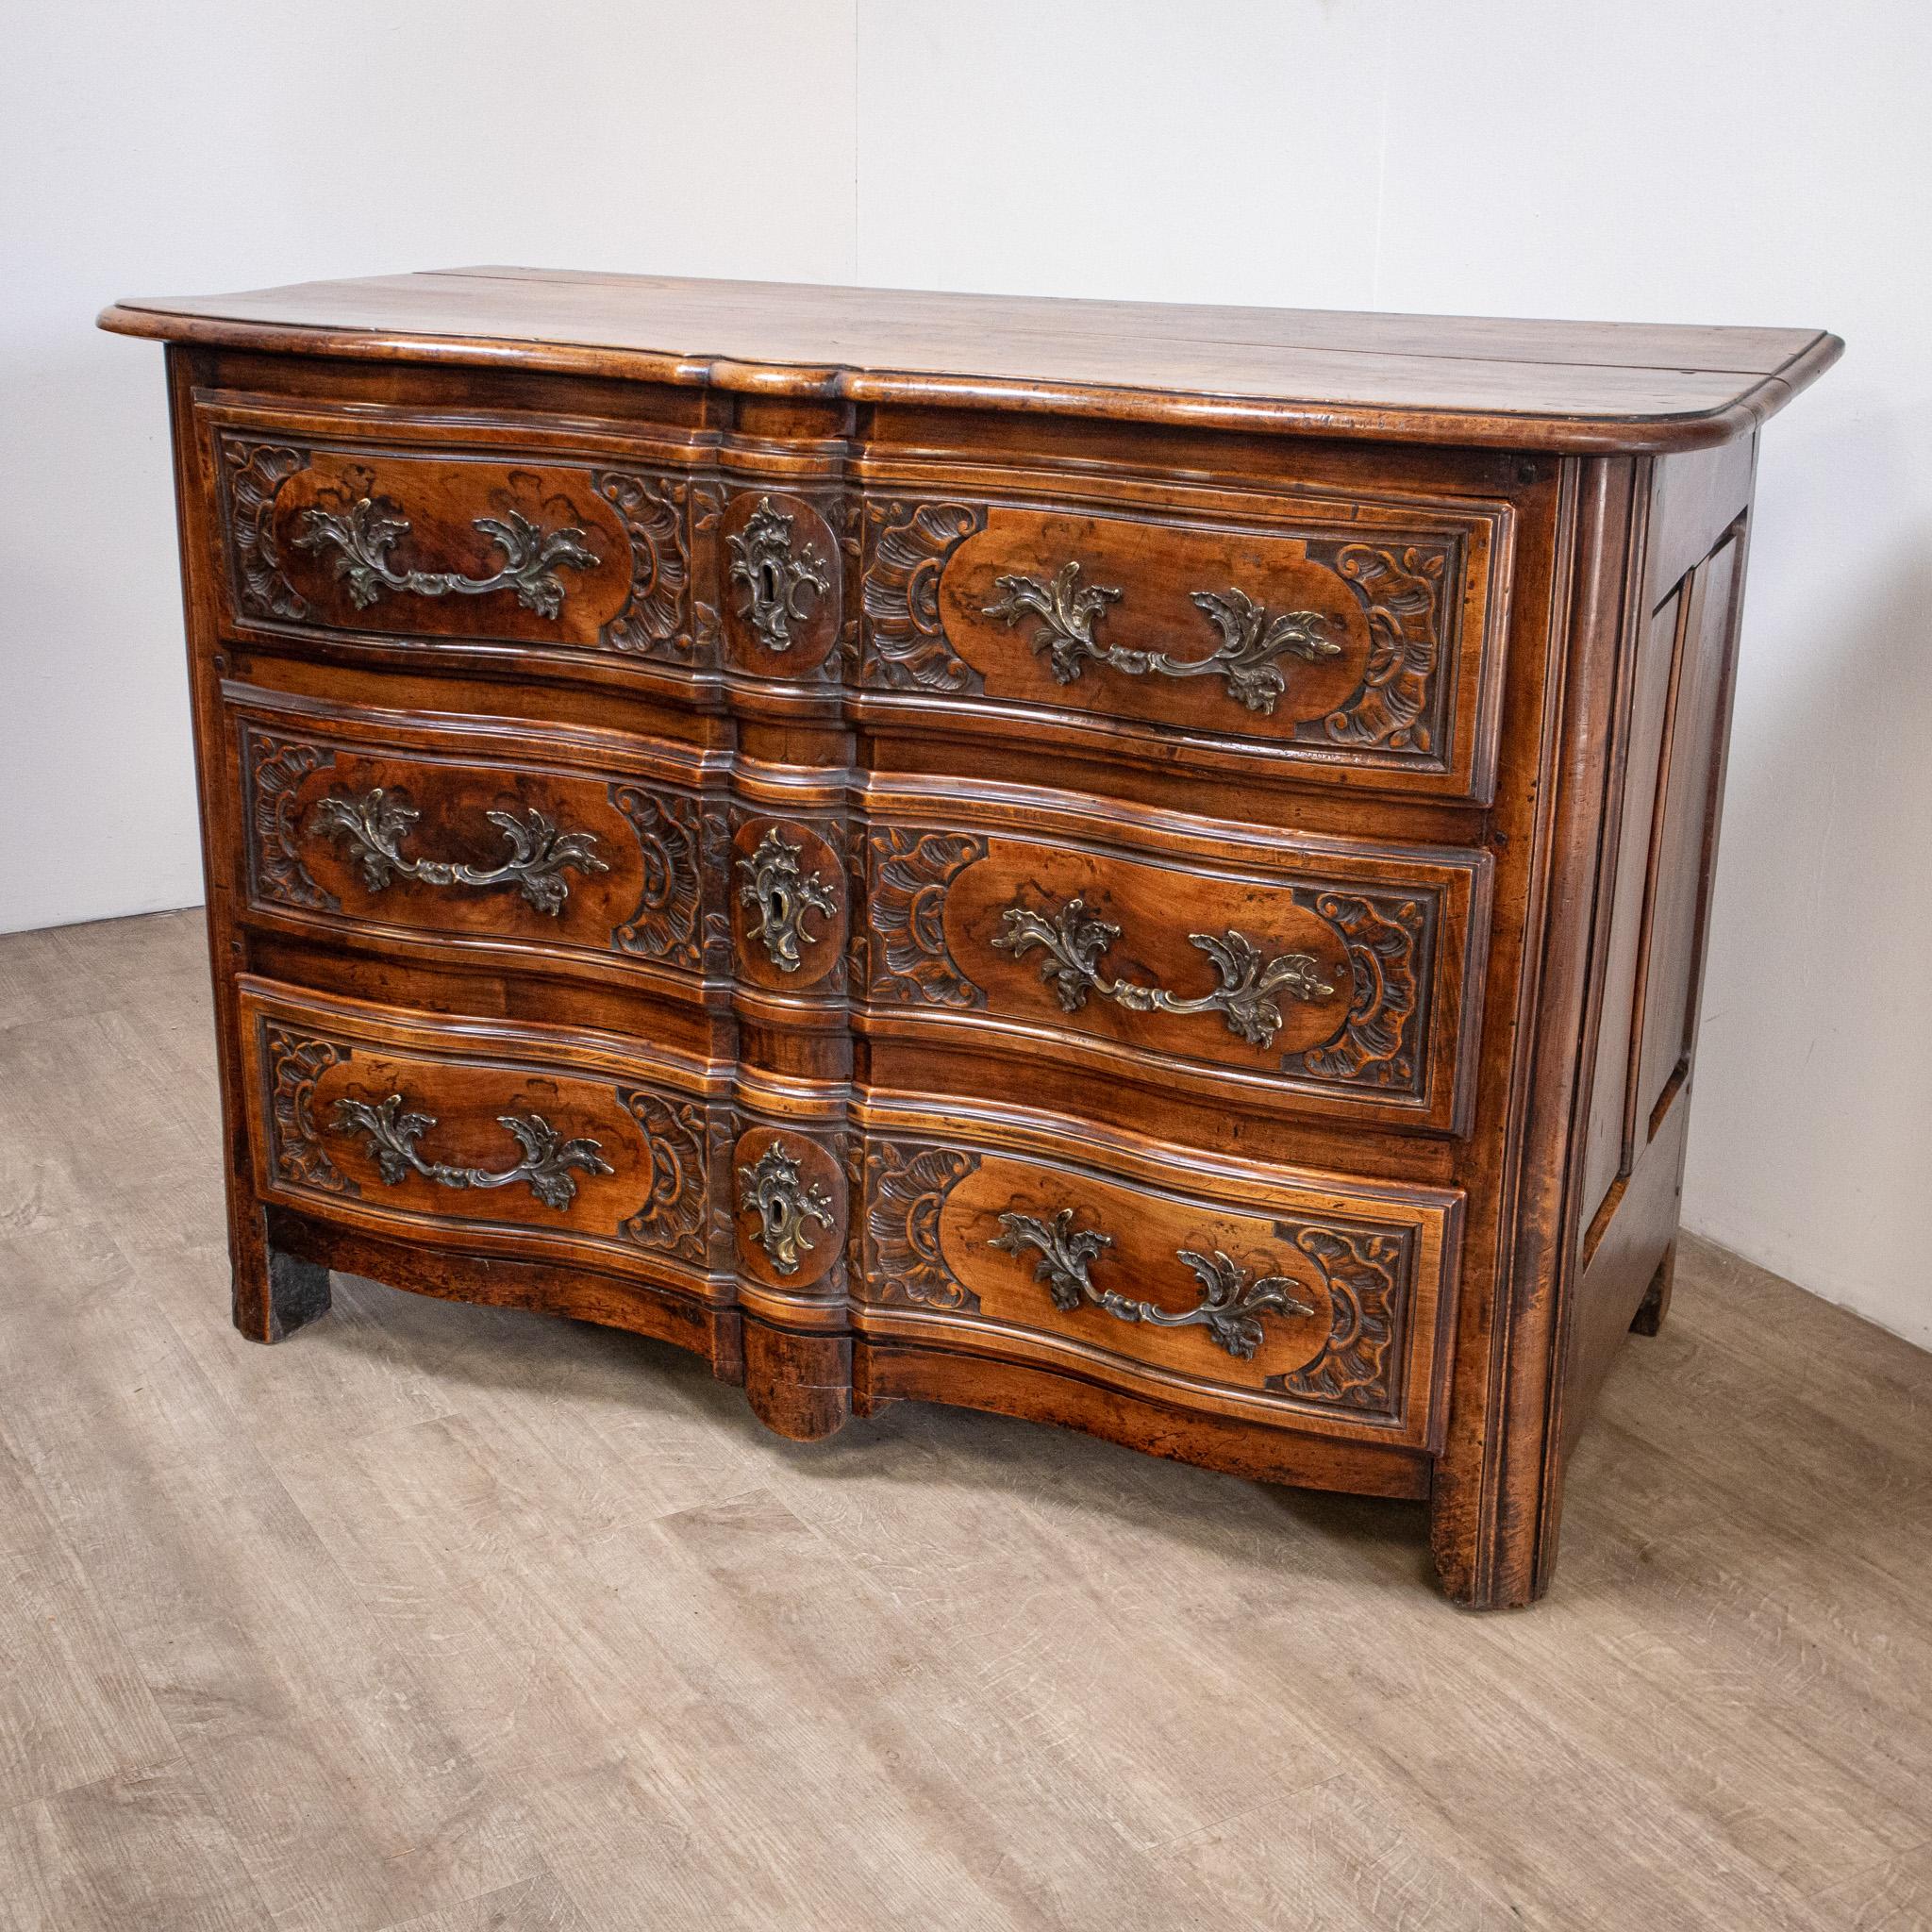 Rococo French Régence 18th Century Walnut Commode or Chest of Drawers For Sale